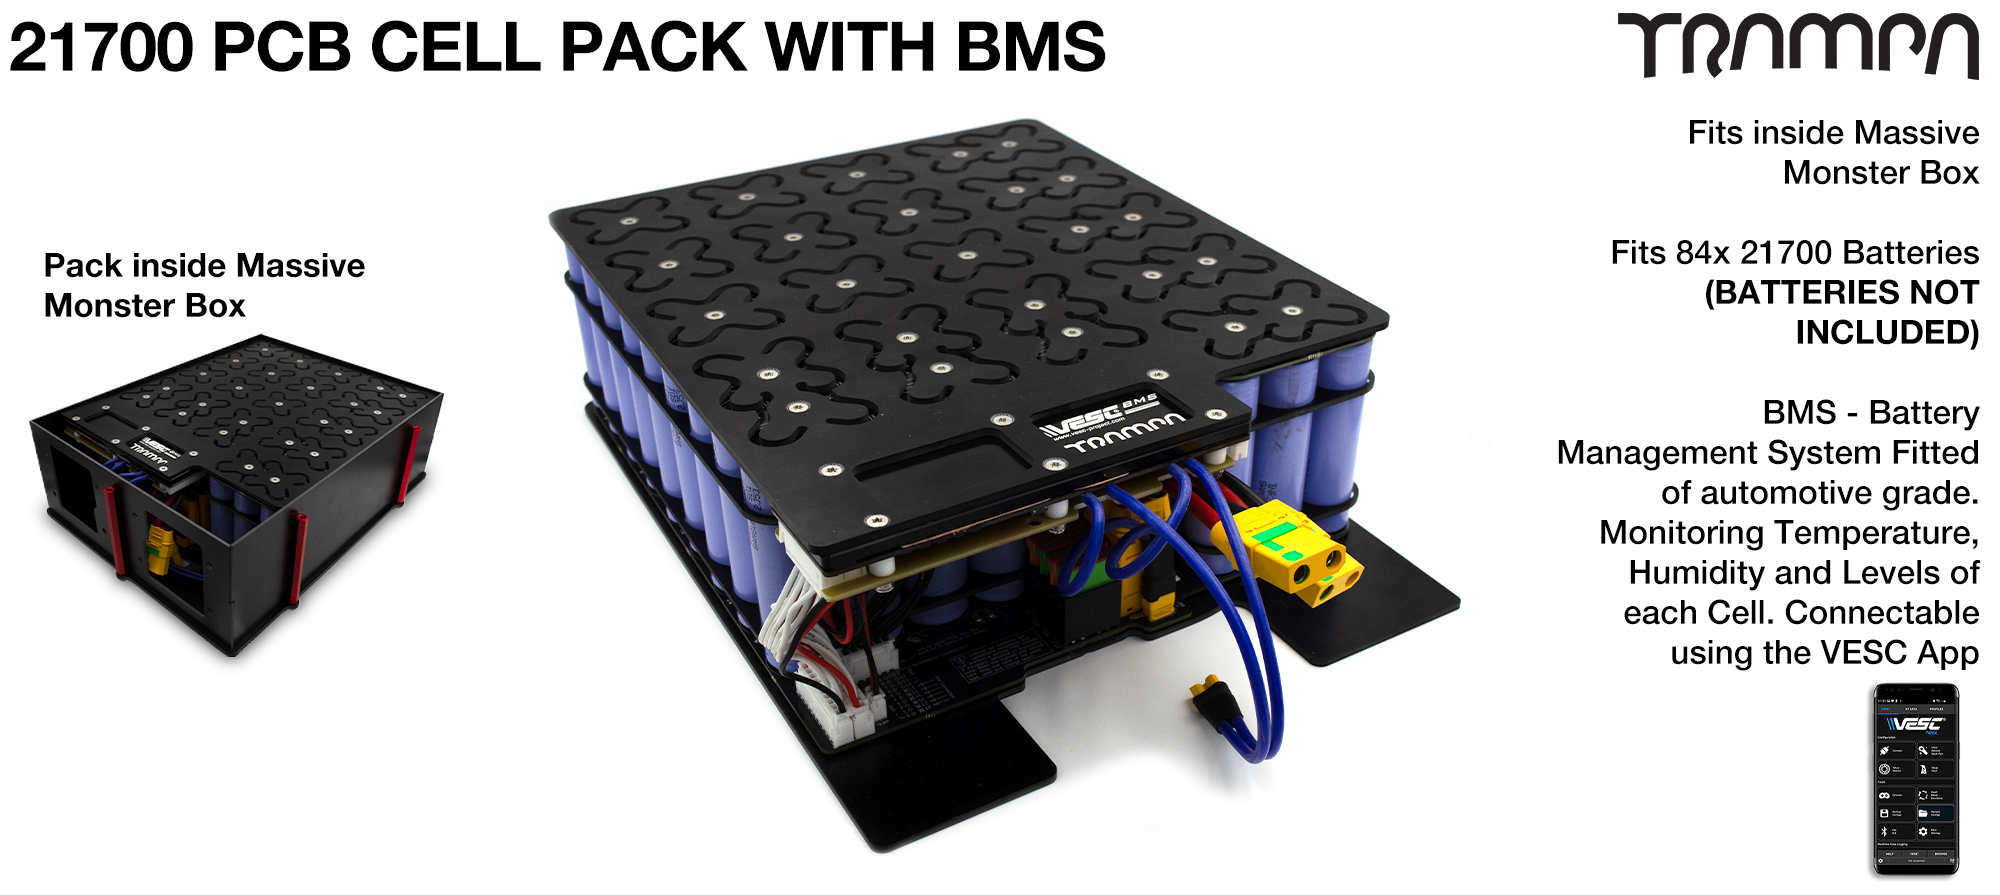 21700 12s7p PCB Cell Pack with BMS fits into the MASSIVE MONSTER box - Holds 84x 21700 cells 12s7p & gives up to 35A of range! 